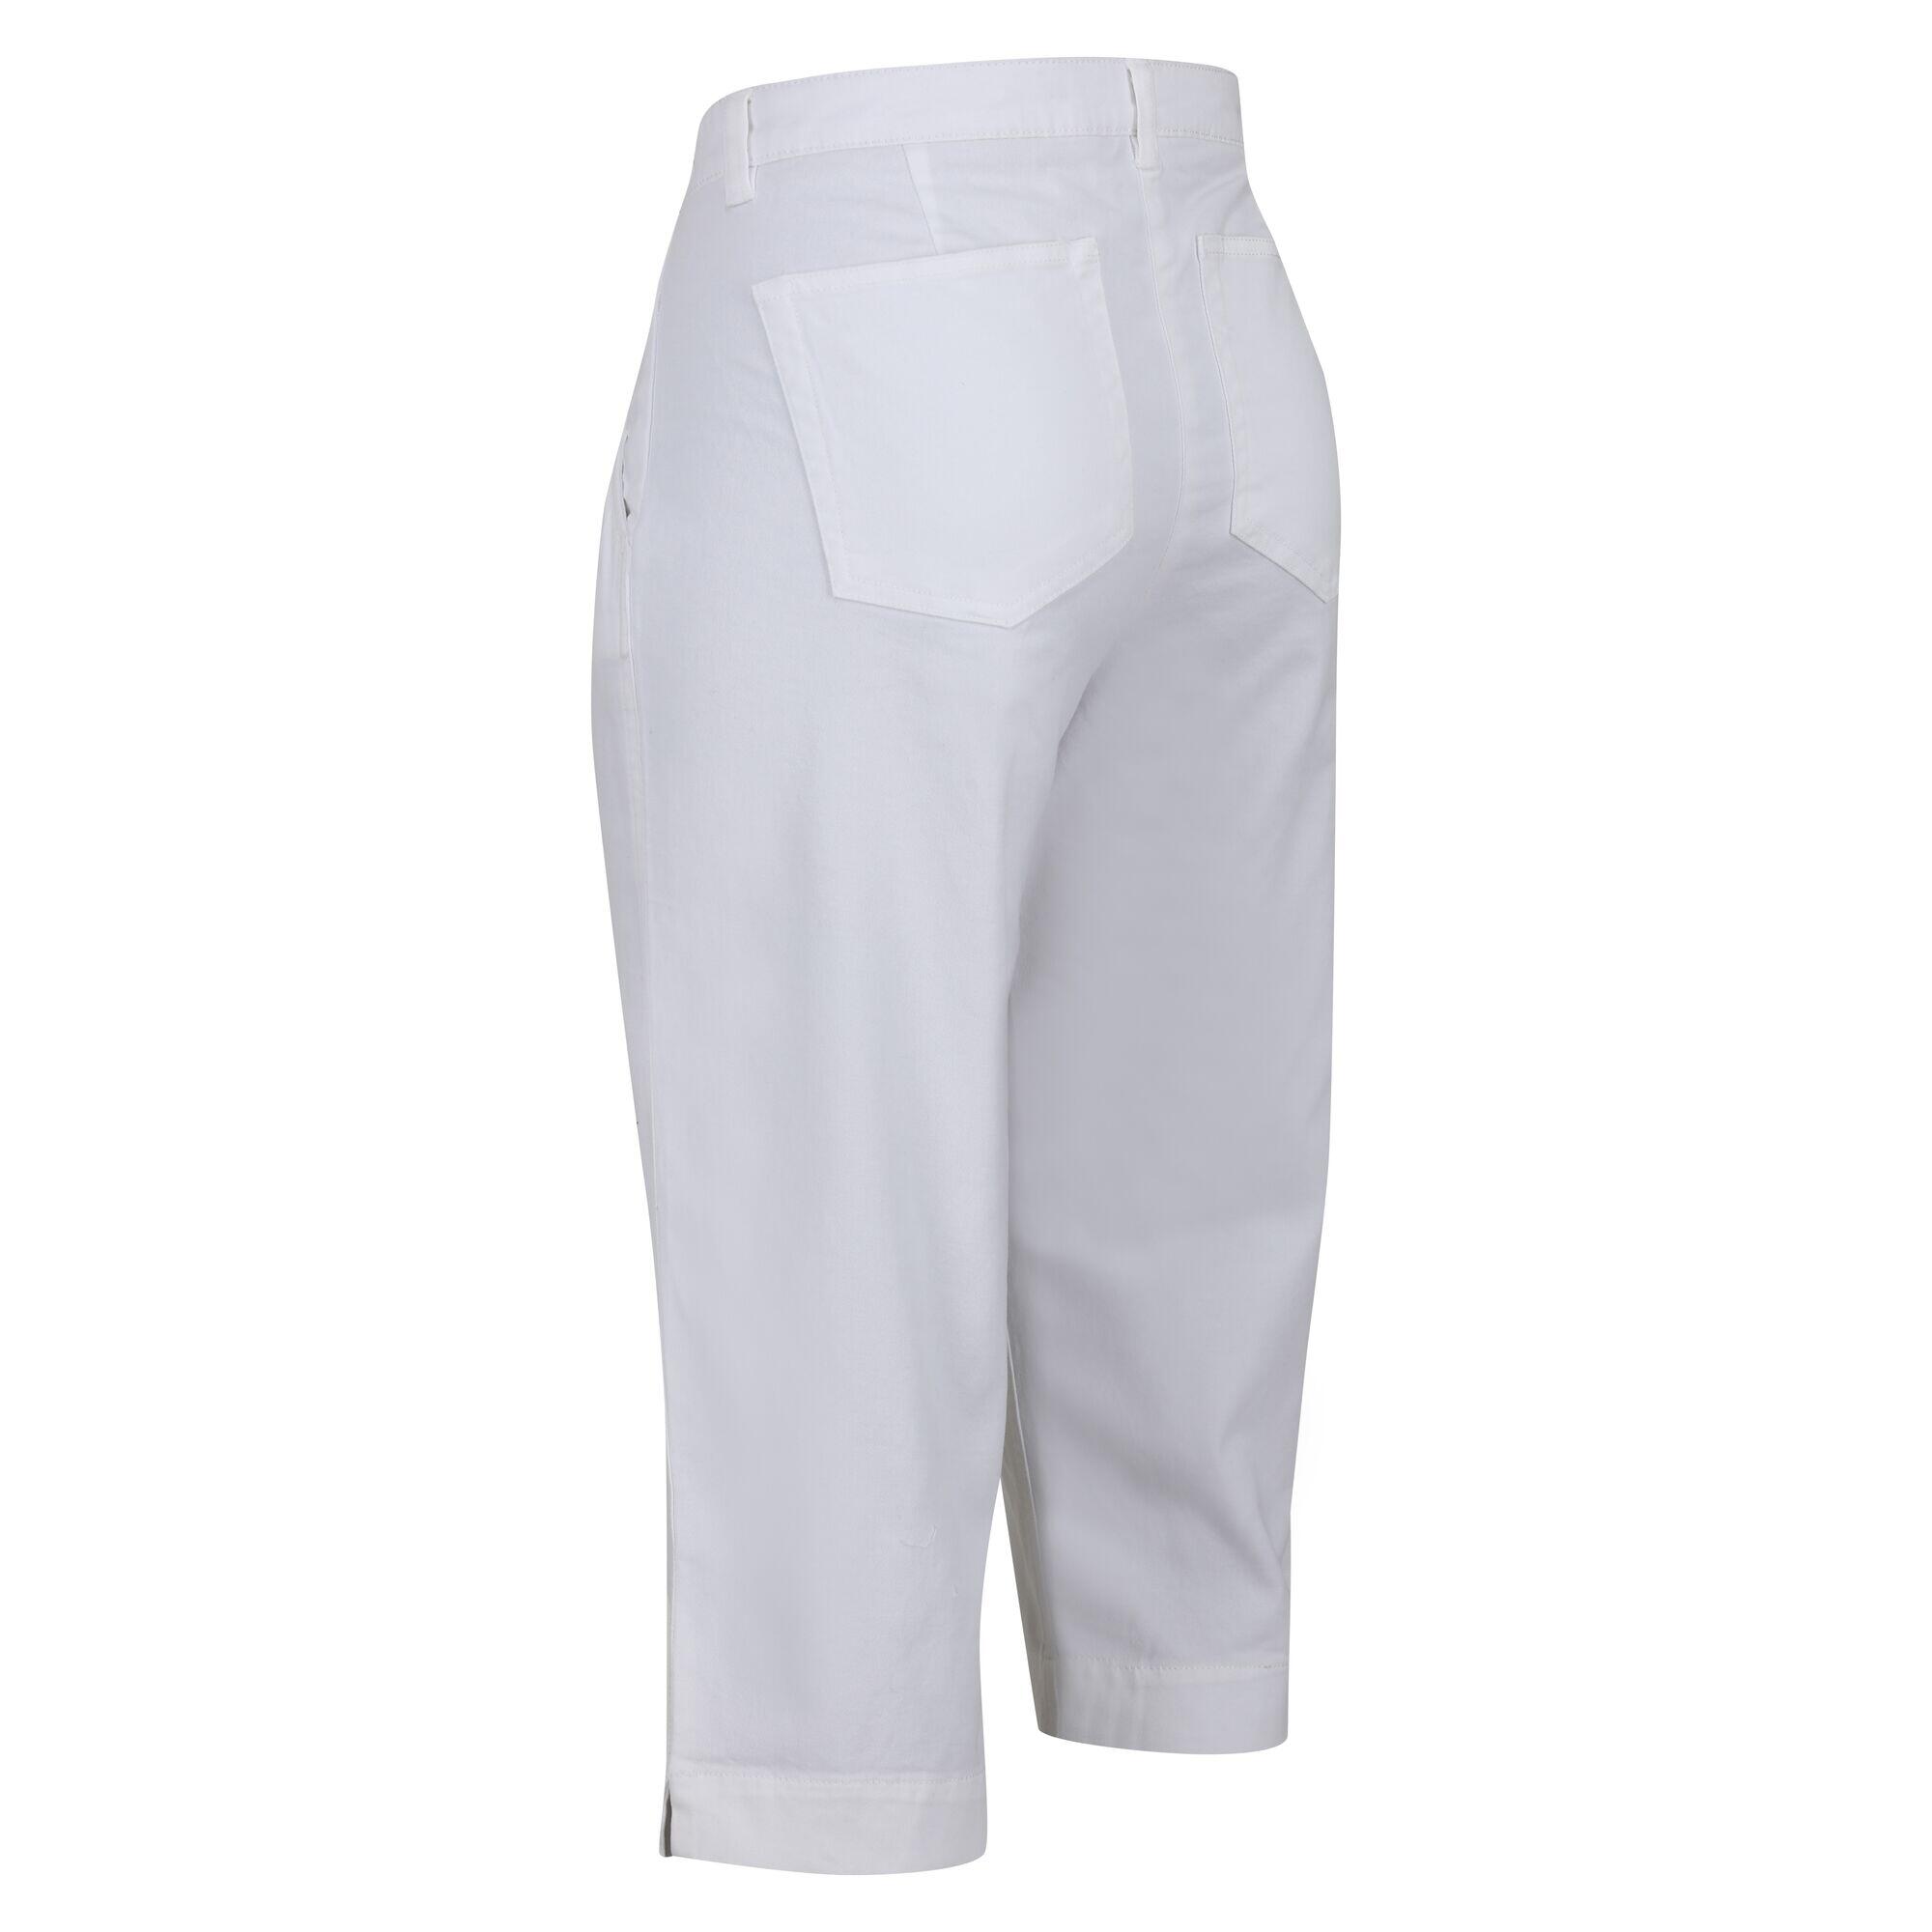 Womens/Ladies Bayla Cropped Trousers (White) 4/5